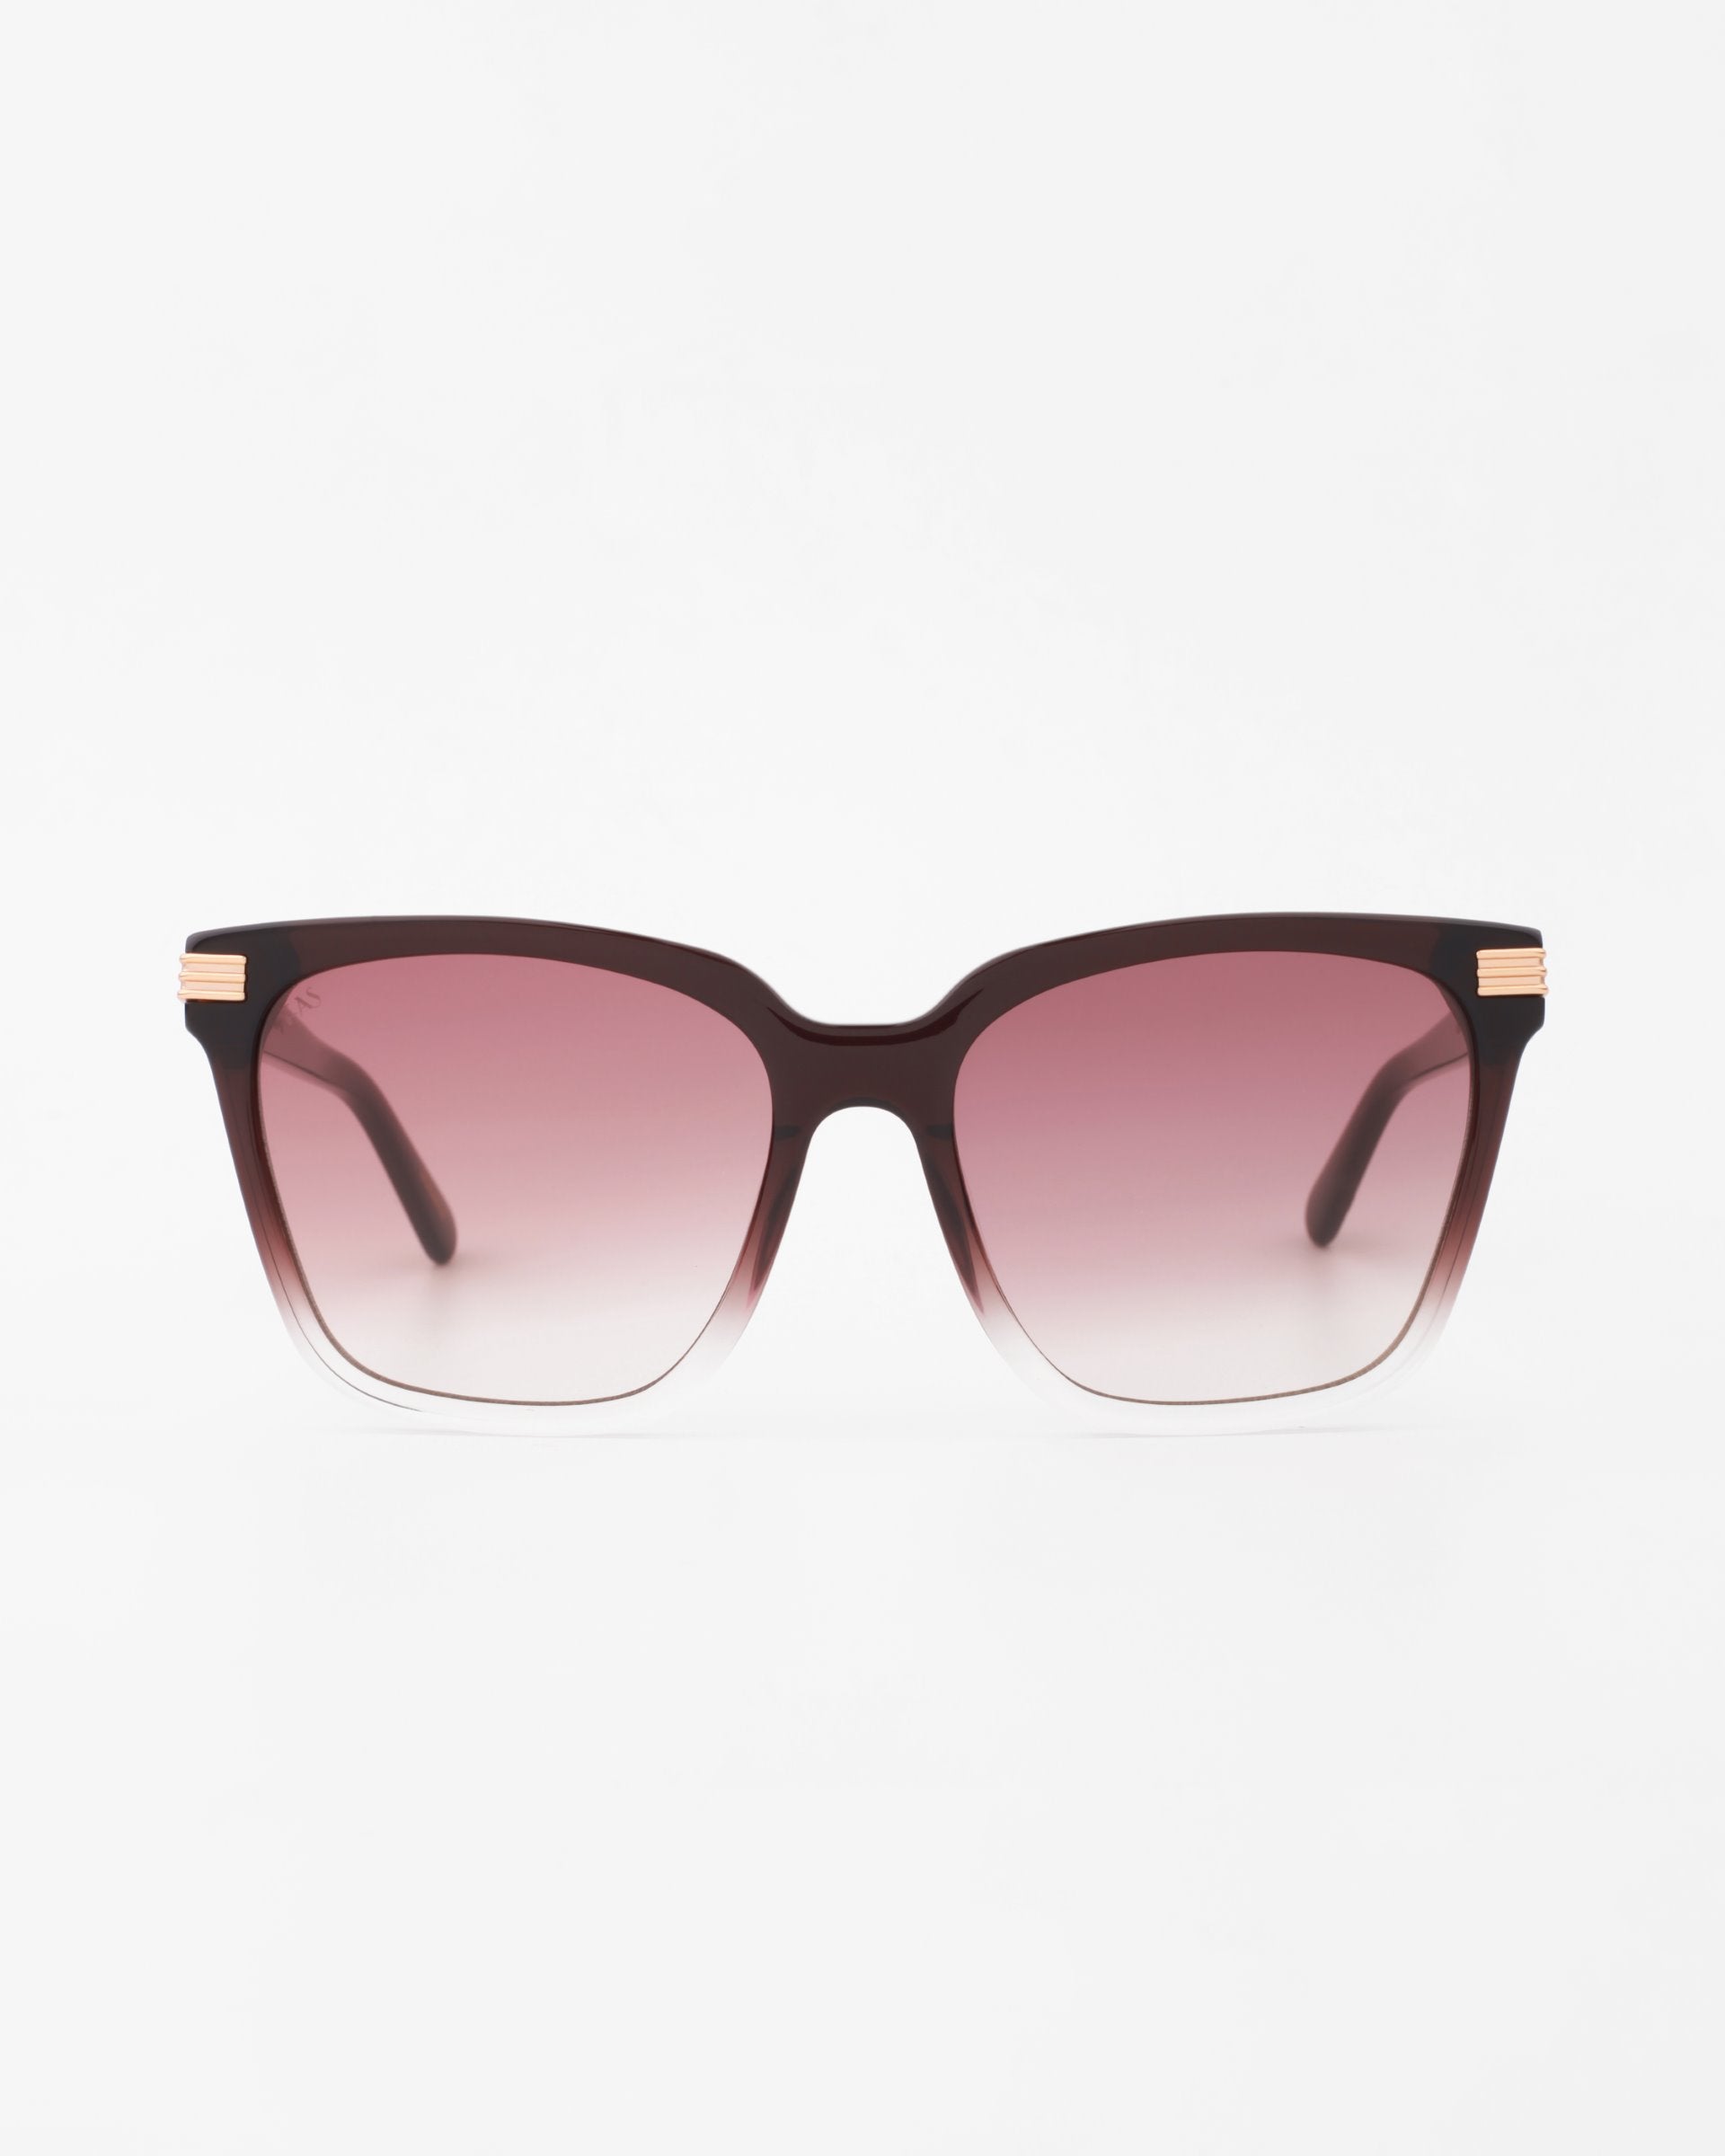 A pair of rectangular, oversized, handmade acetate sunglasses with a gradient frame that transitions from dark brown at the top to clear at the bottom. The UV-protected lenses fade from dark pink at the top to light pink at the bottom. The arms feature 18-karat gold-plated accents near the hinges. These are Gaia by For Art&#39;s Sake®.